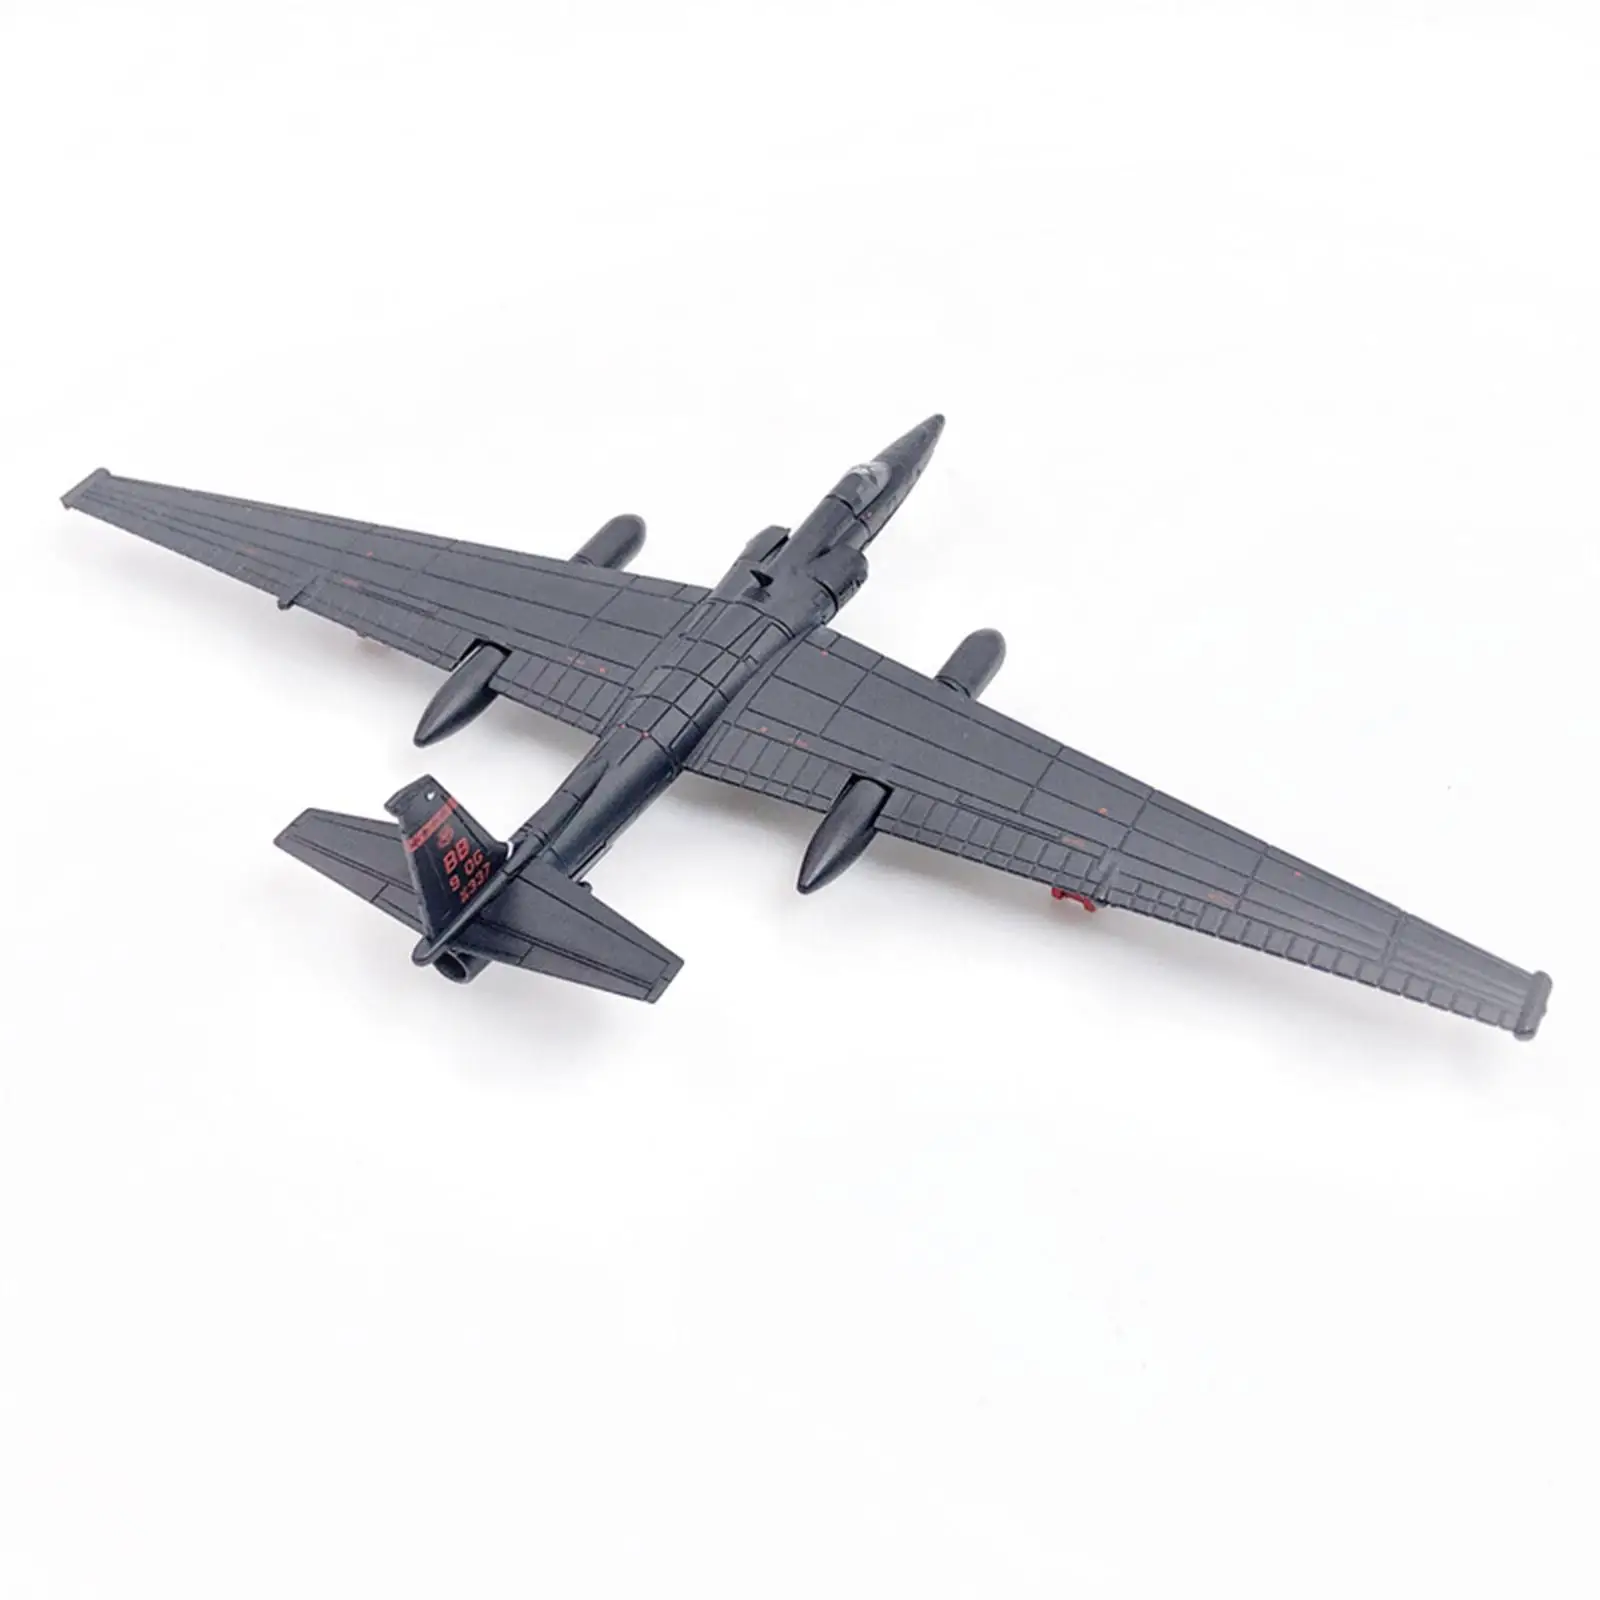 1/144 U2 Reconnaissance Aircraft Model with Stand, Aviation Collectibles